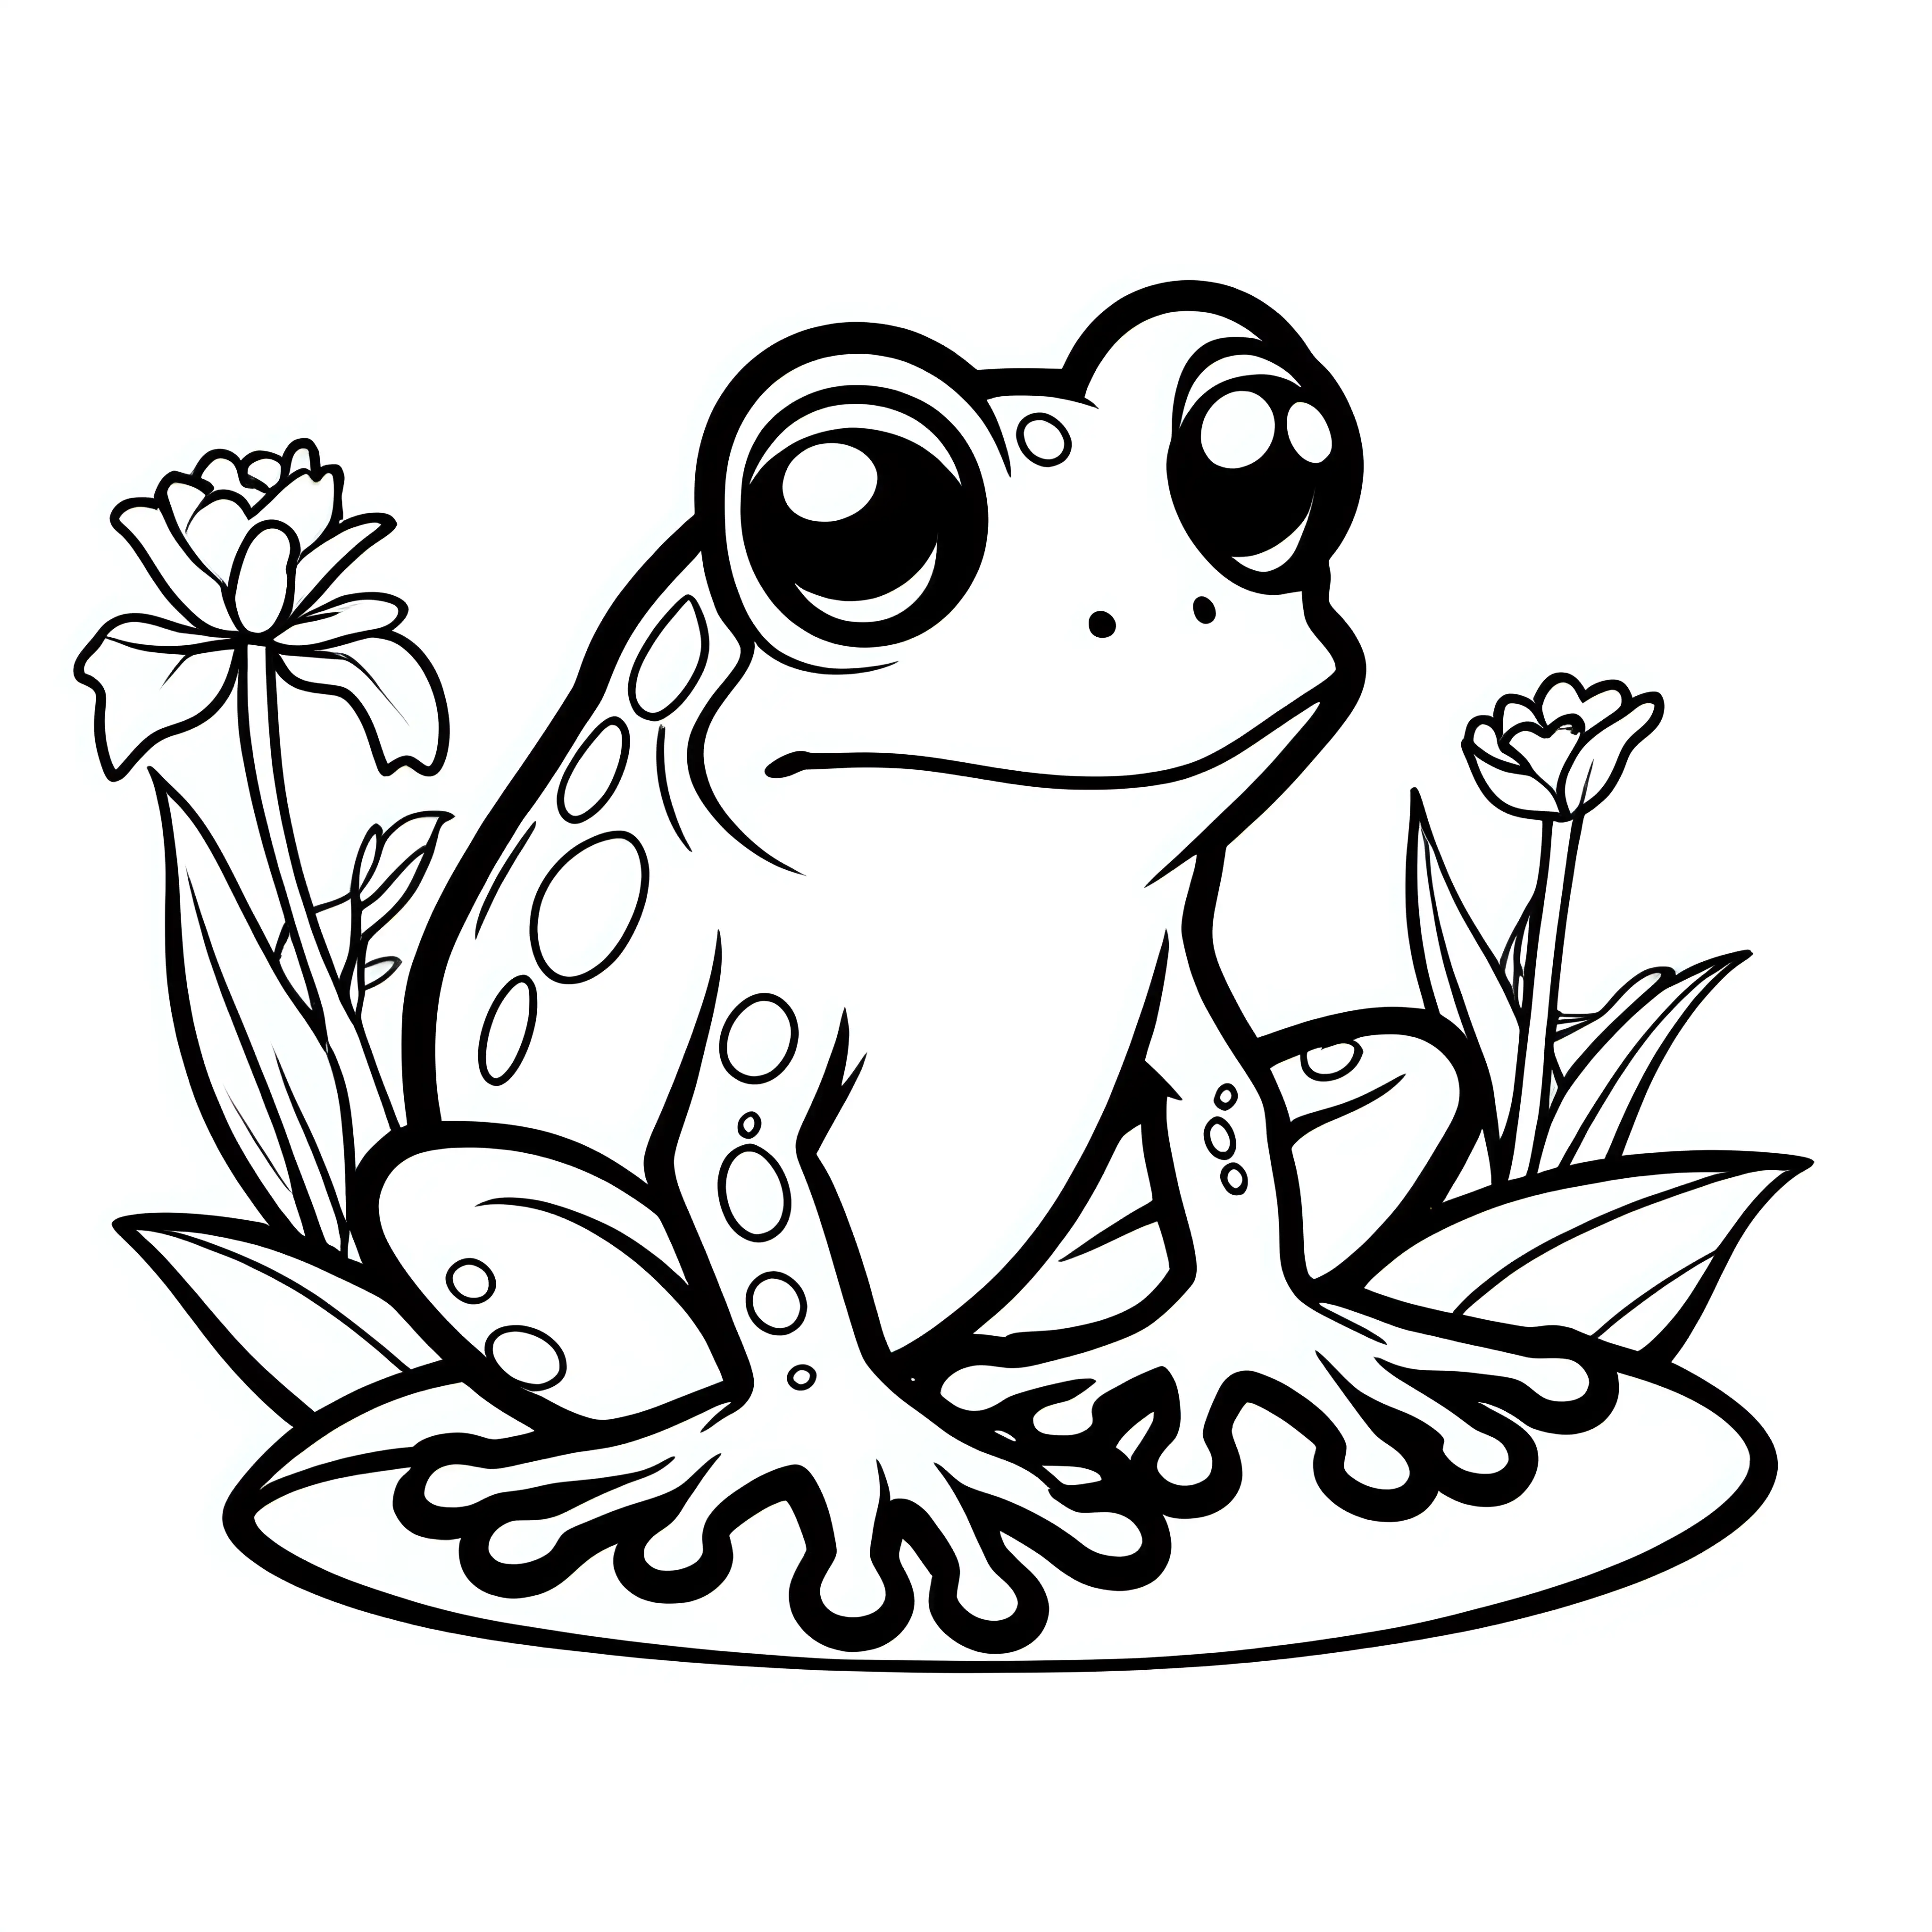 Adorable Magical Frog Coloring Page for Kids Black and White Outline Drawing